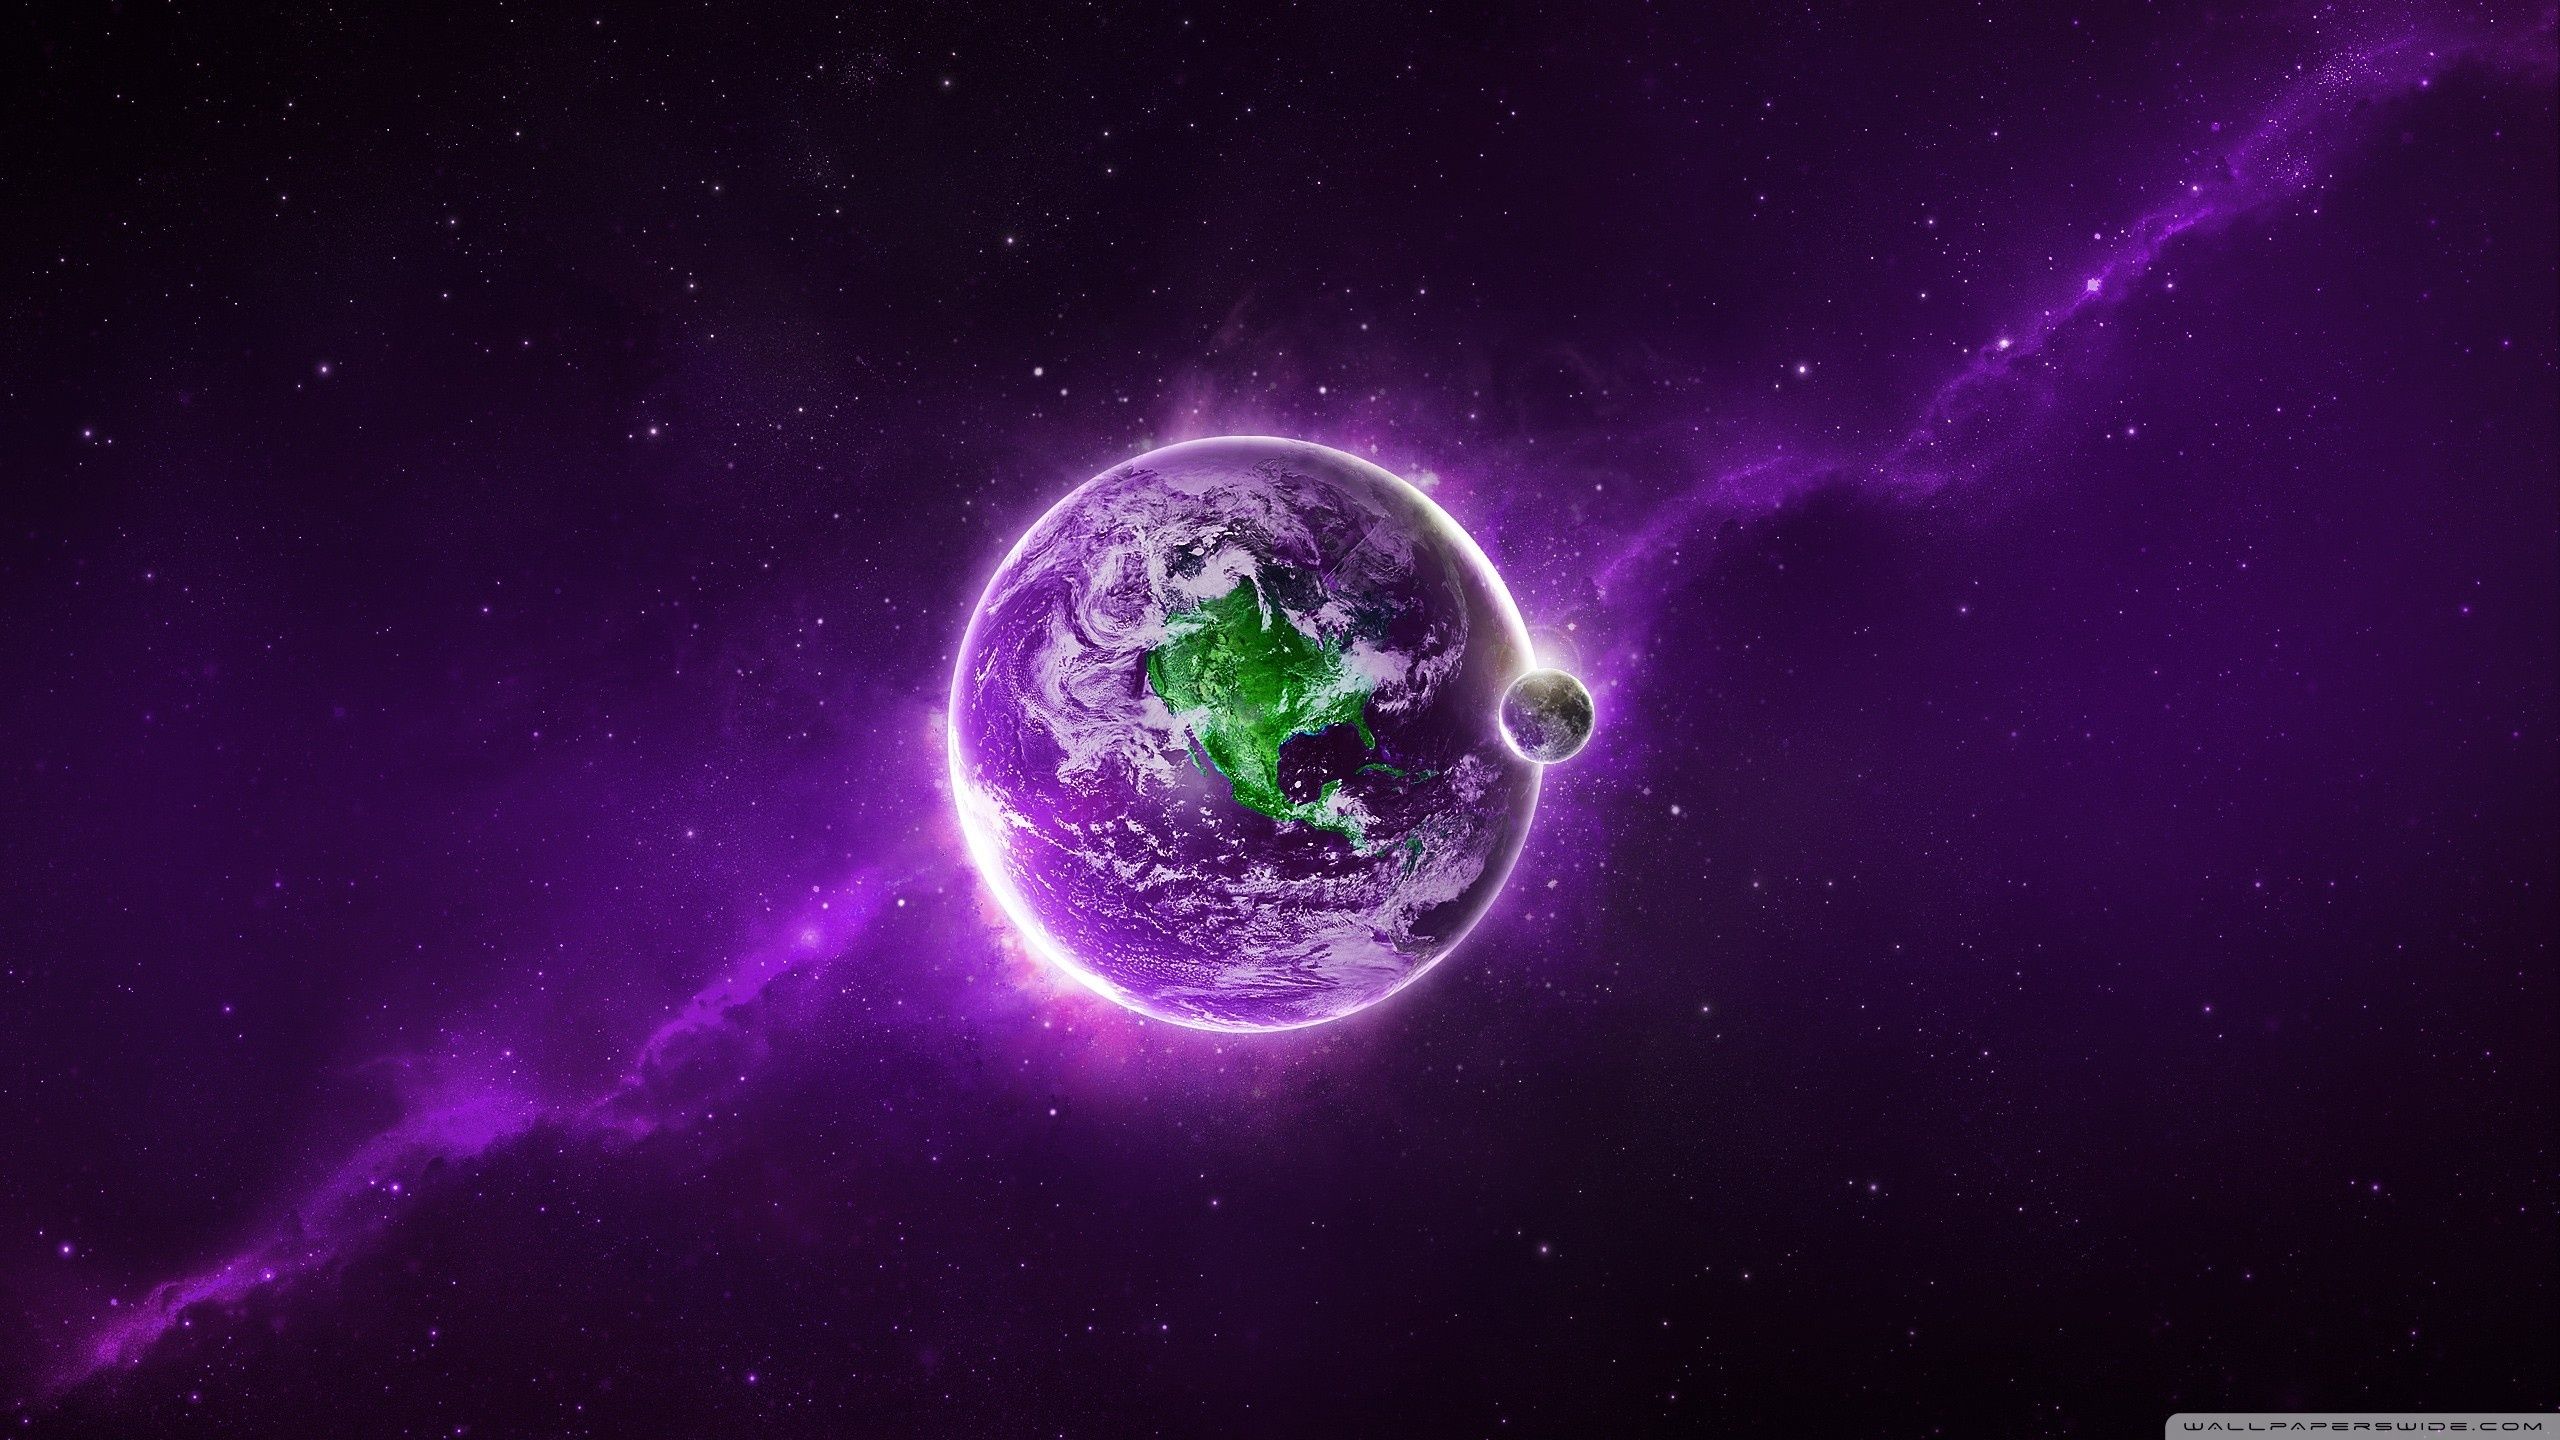 Abstract Purple Earth Ultra HD Desktop Backgrounds Wallpapers for 4K